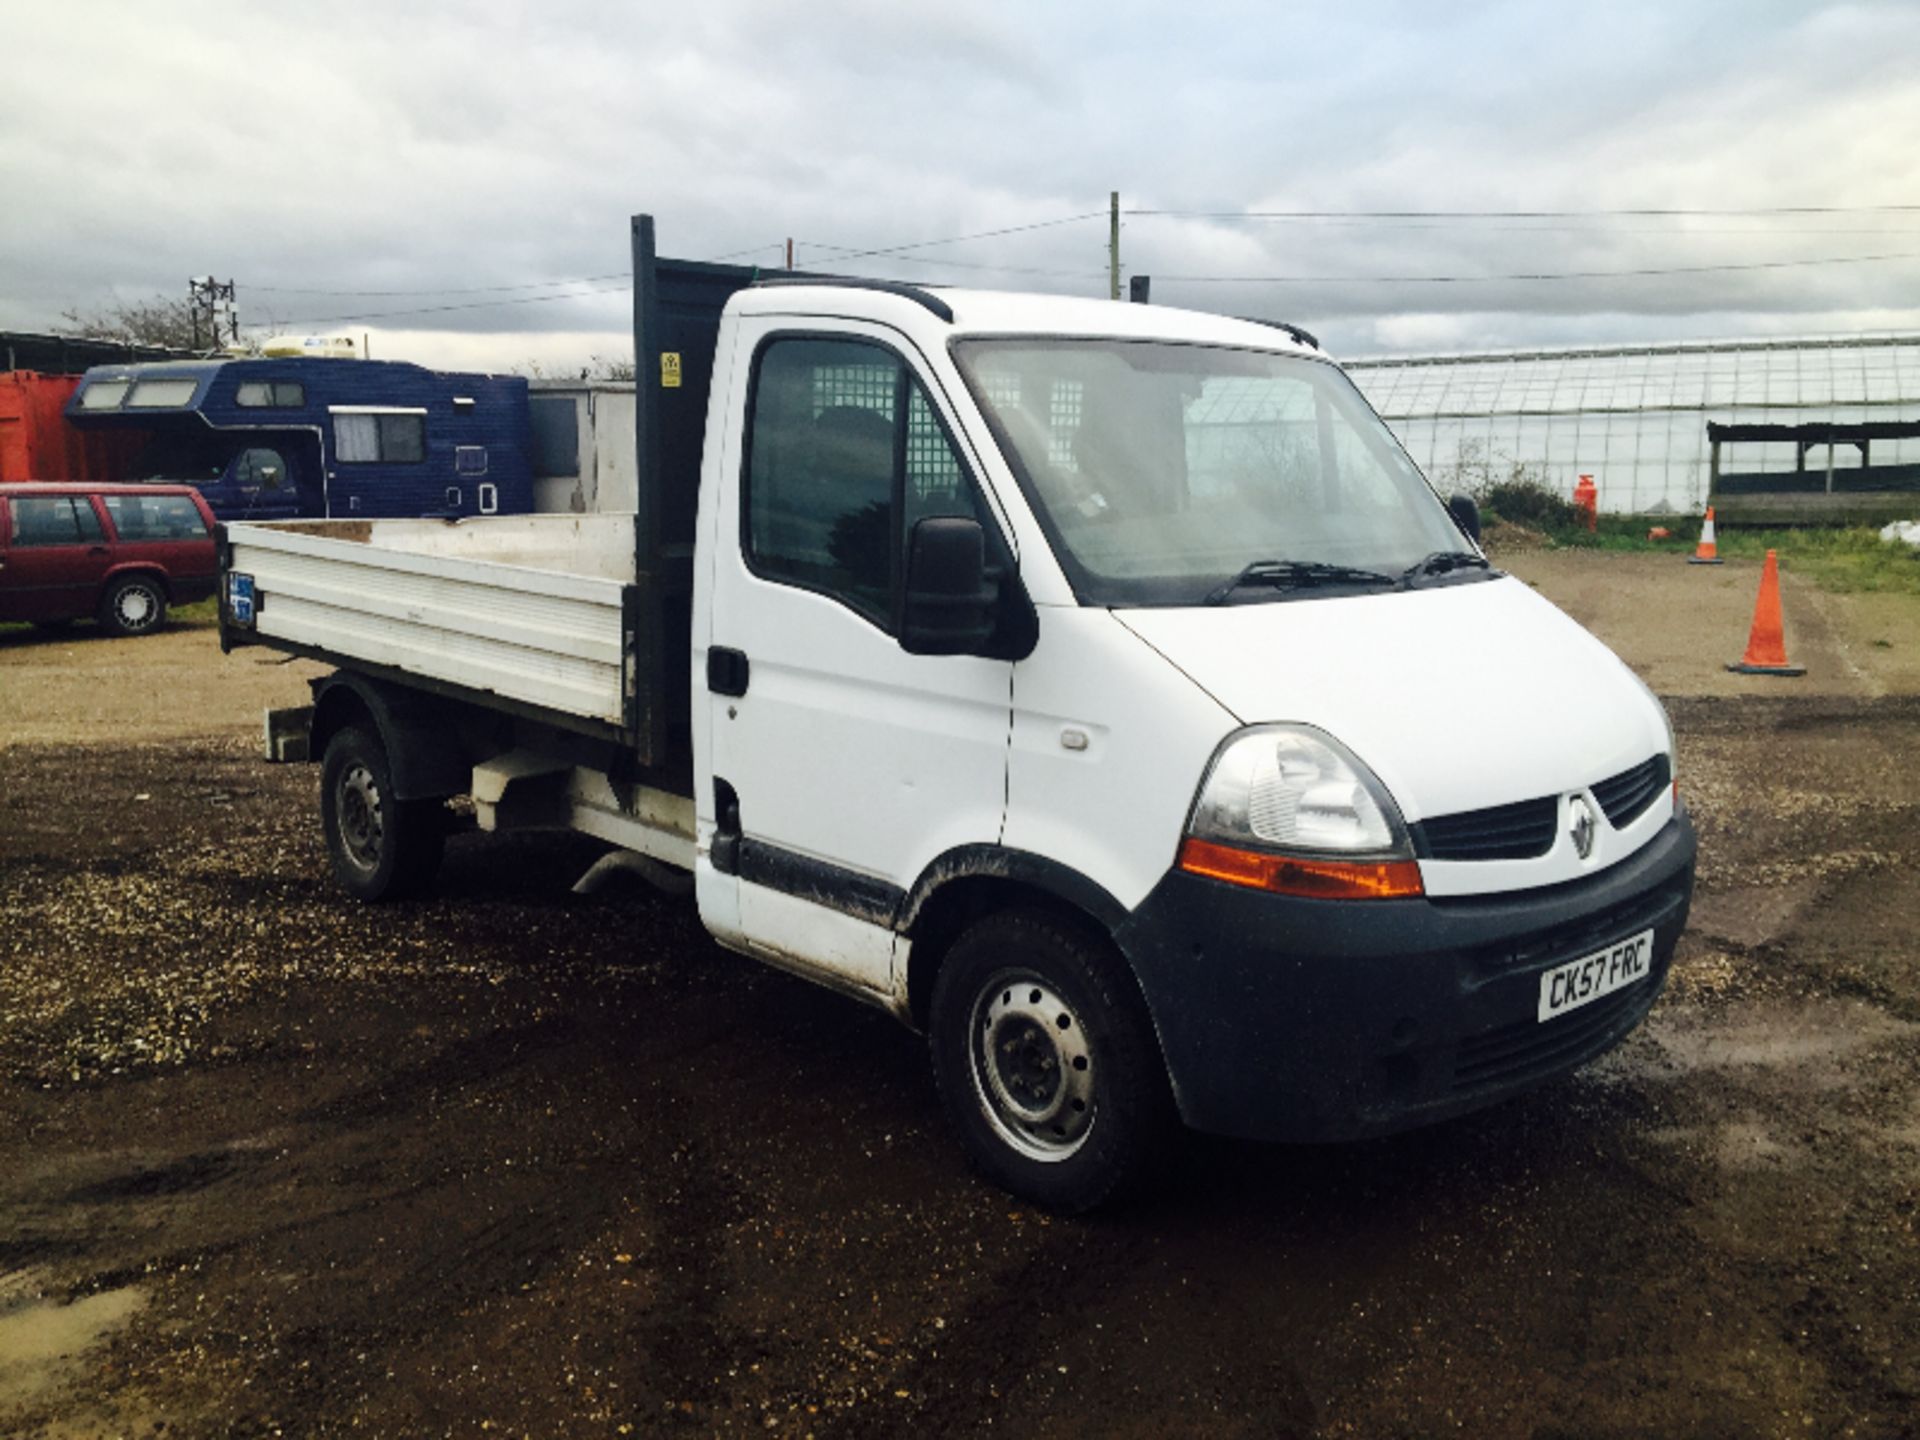 (ON SALE)RENAULT MASTER ML35 DCI **TIPPER** 2007(57) REG **AIR CON**FULL ELECTRIC PACK**SINGLE CAB**